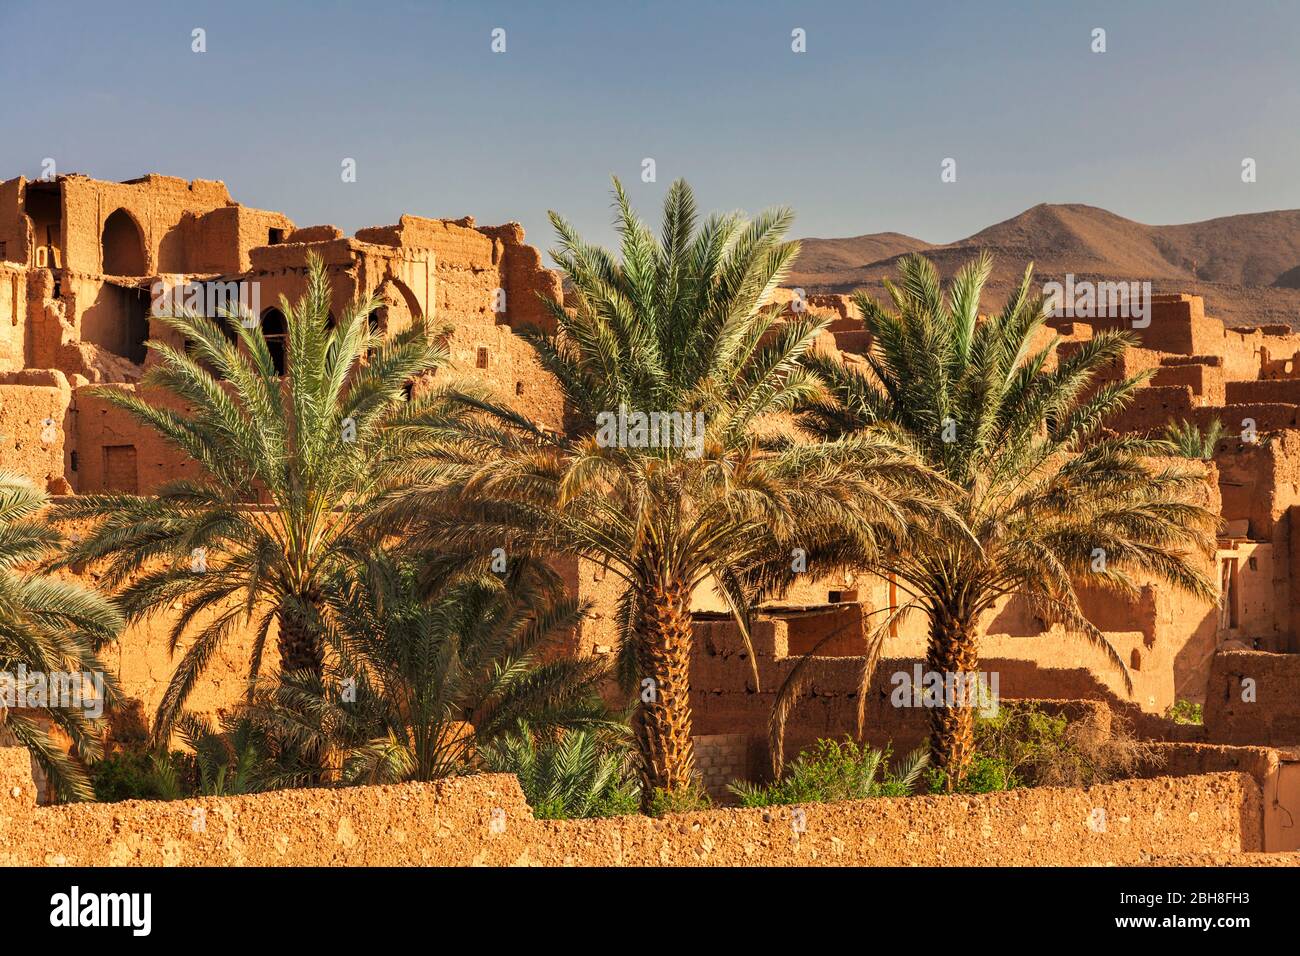 Lehmdorf Ksar Tamnougalte, the country's oldest kasbah, Draa Valley, South Morocco, Morocco, Al-Magreb, Africa Stock Photo